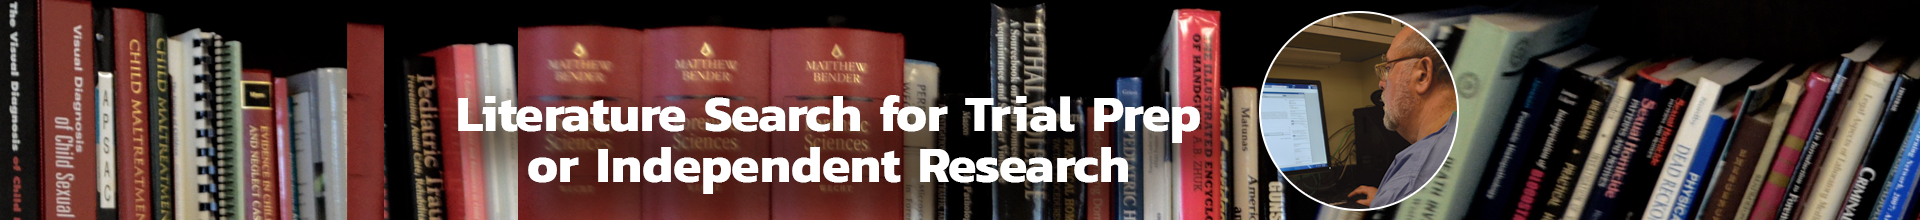 Literature search for trial prep or research